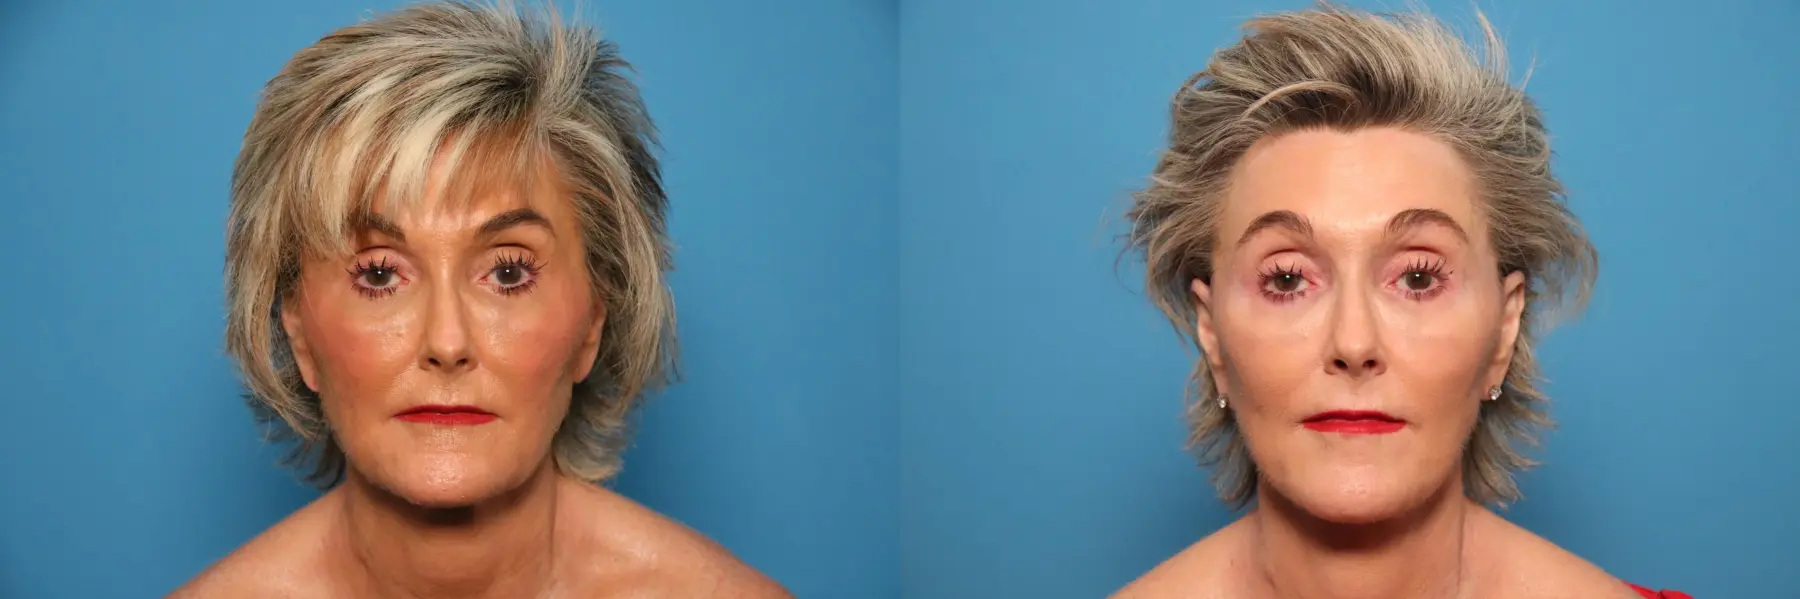 Facelift/Mini Facelift: Patient 6 - Before and After 1